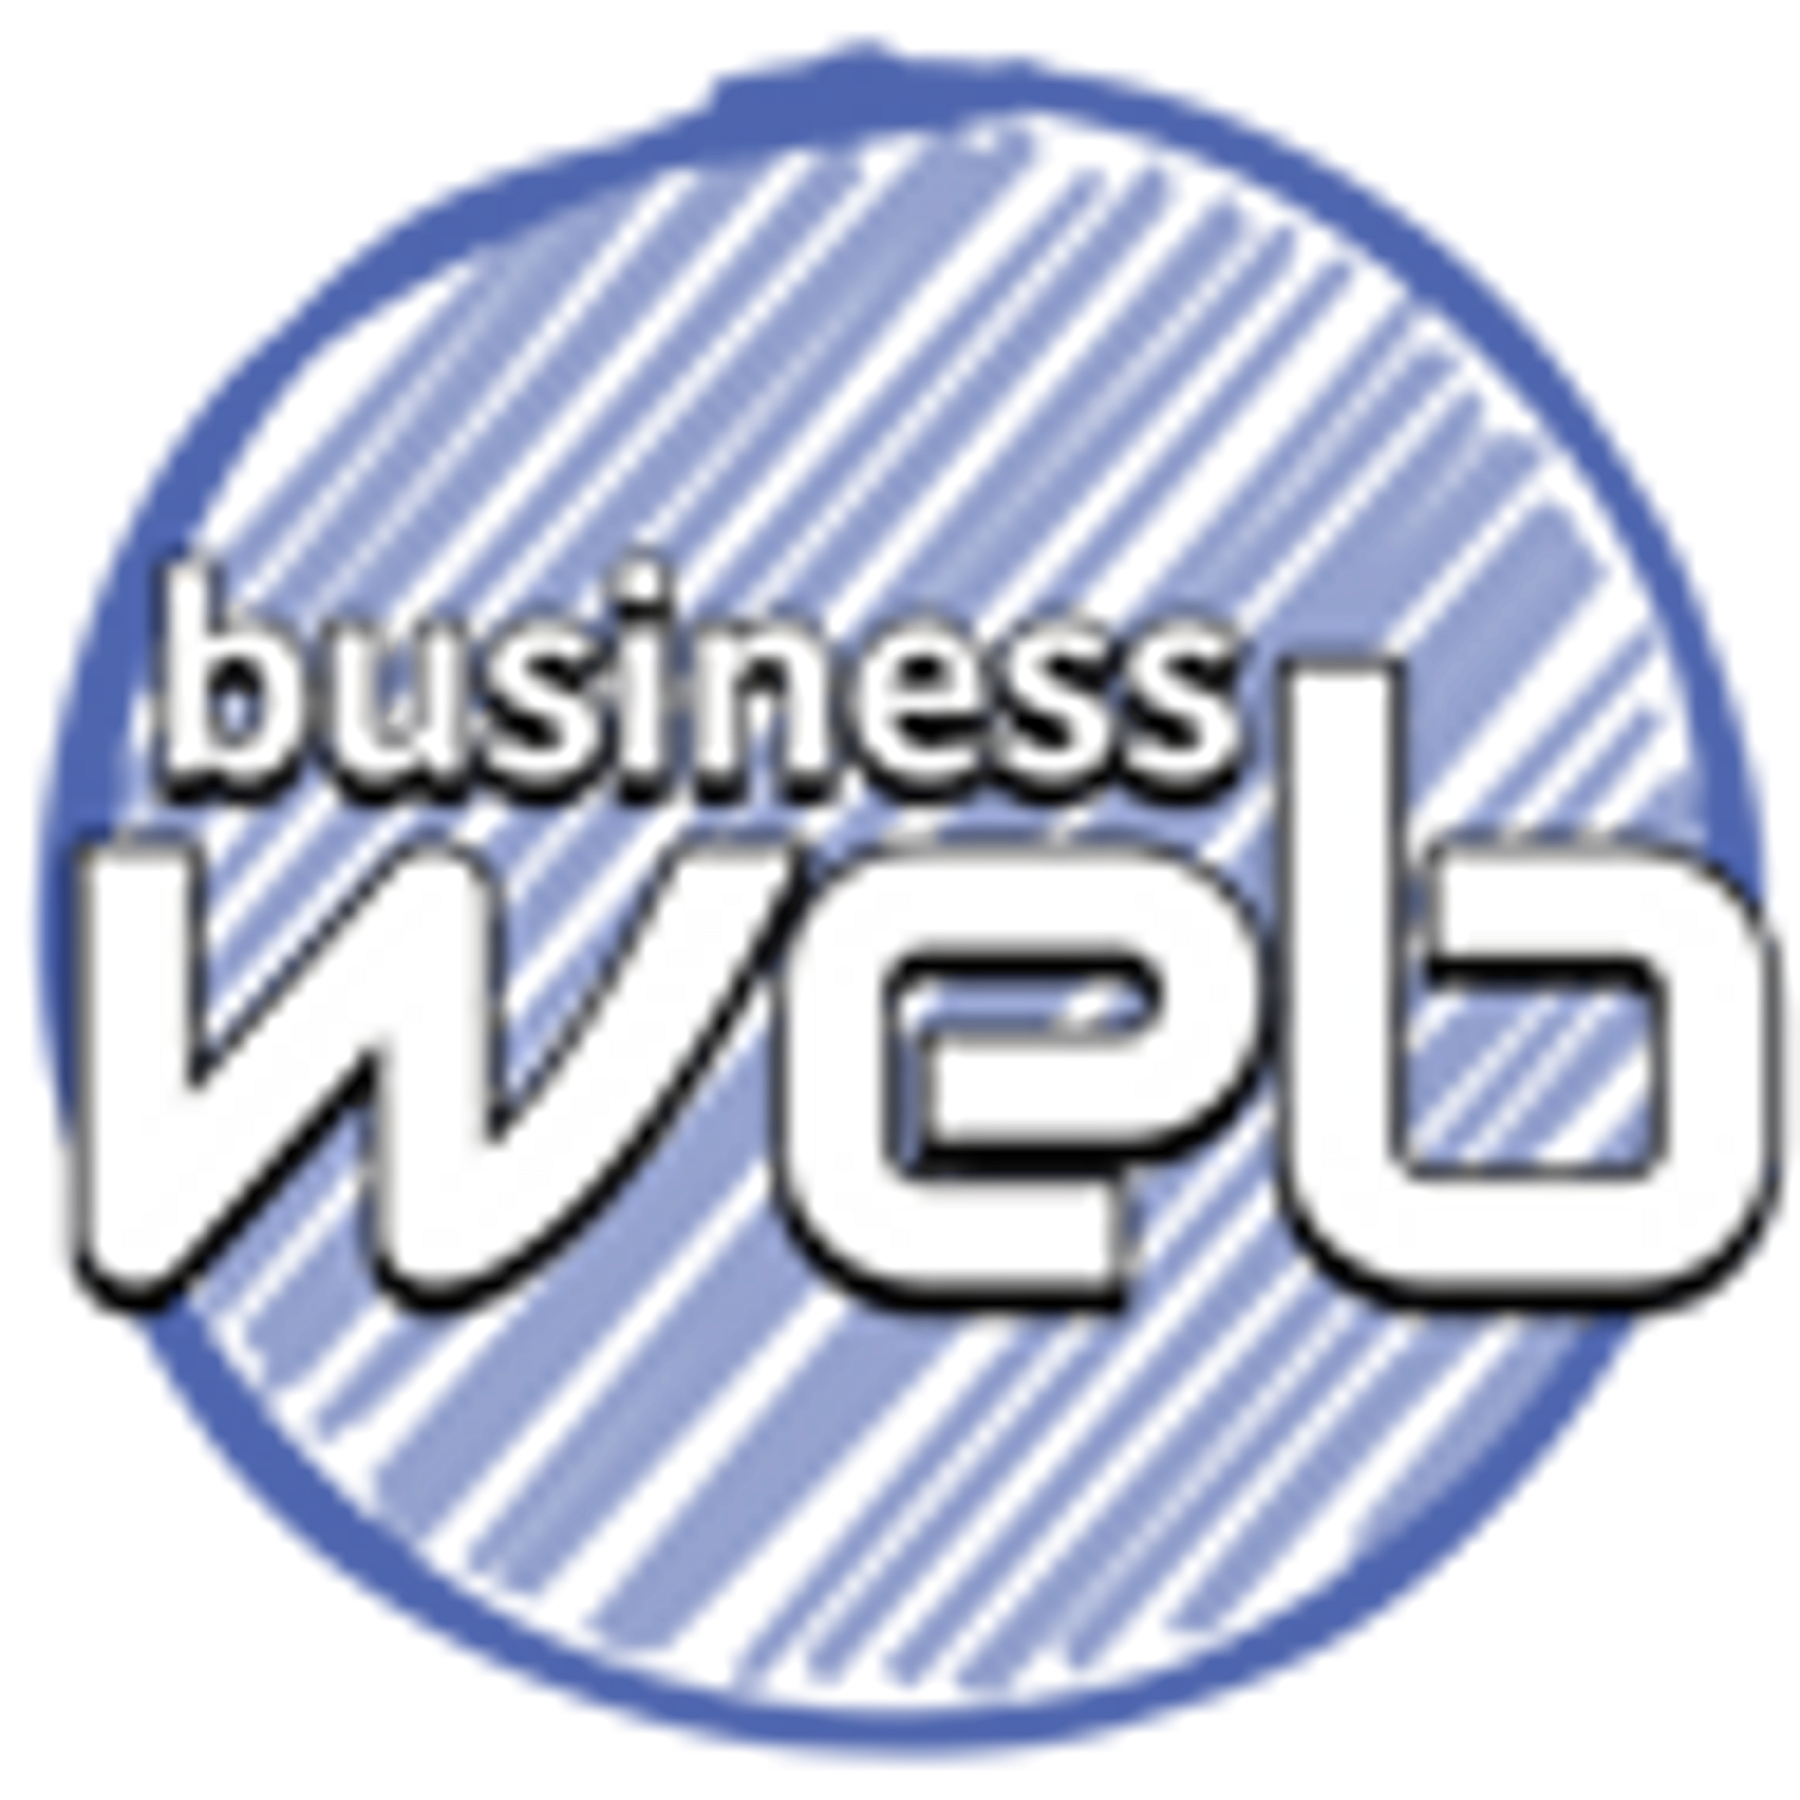 Business Web | Blog by the Industry Direct